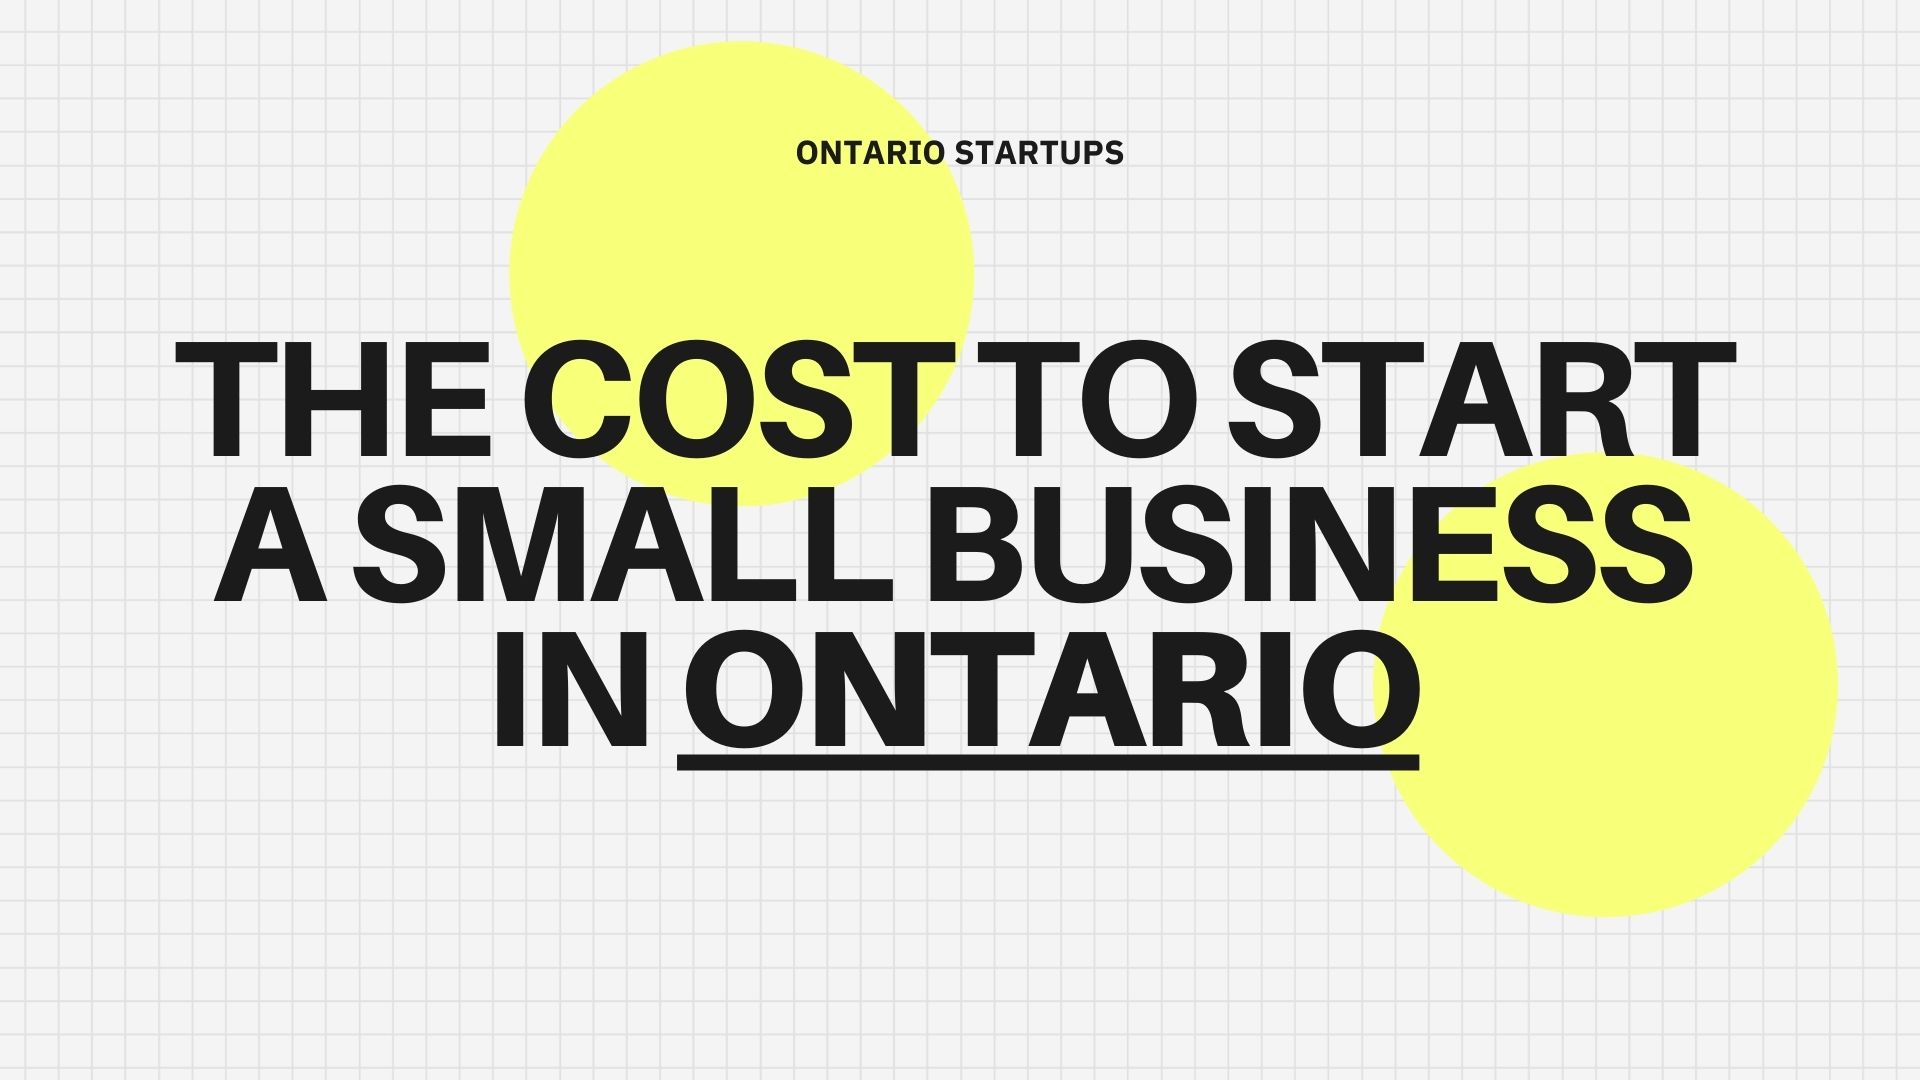 The cost to start a small business in Ontario